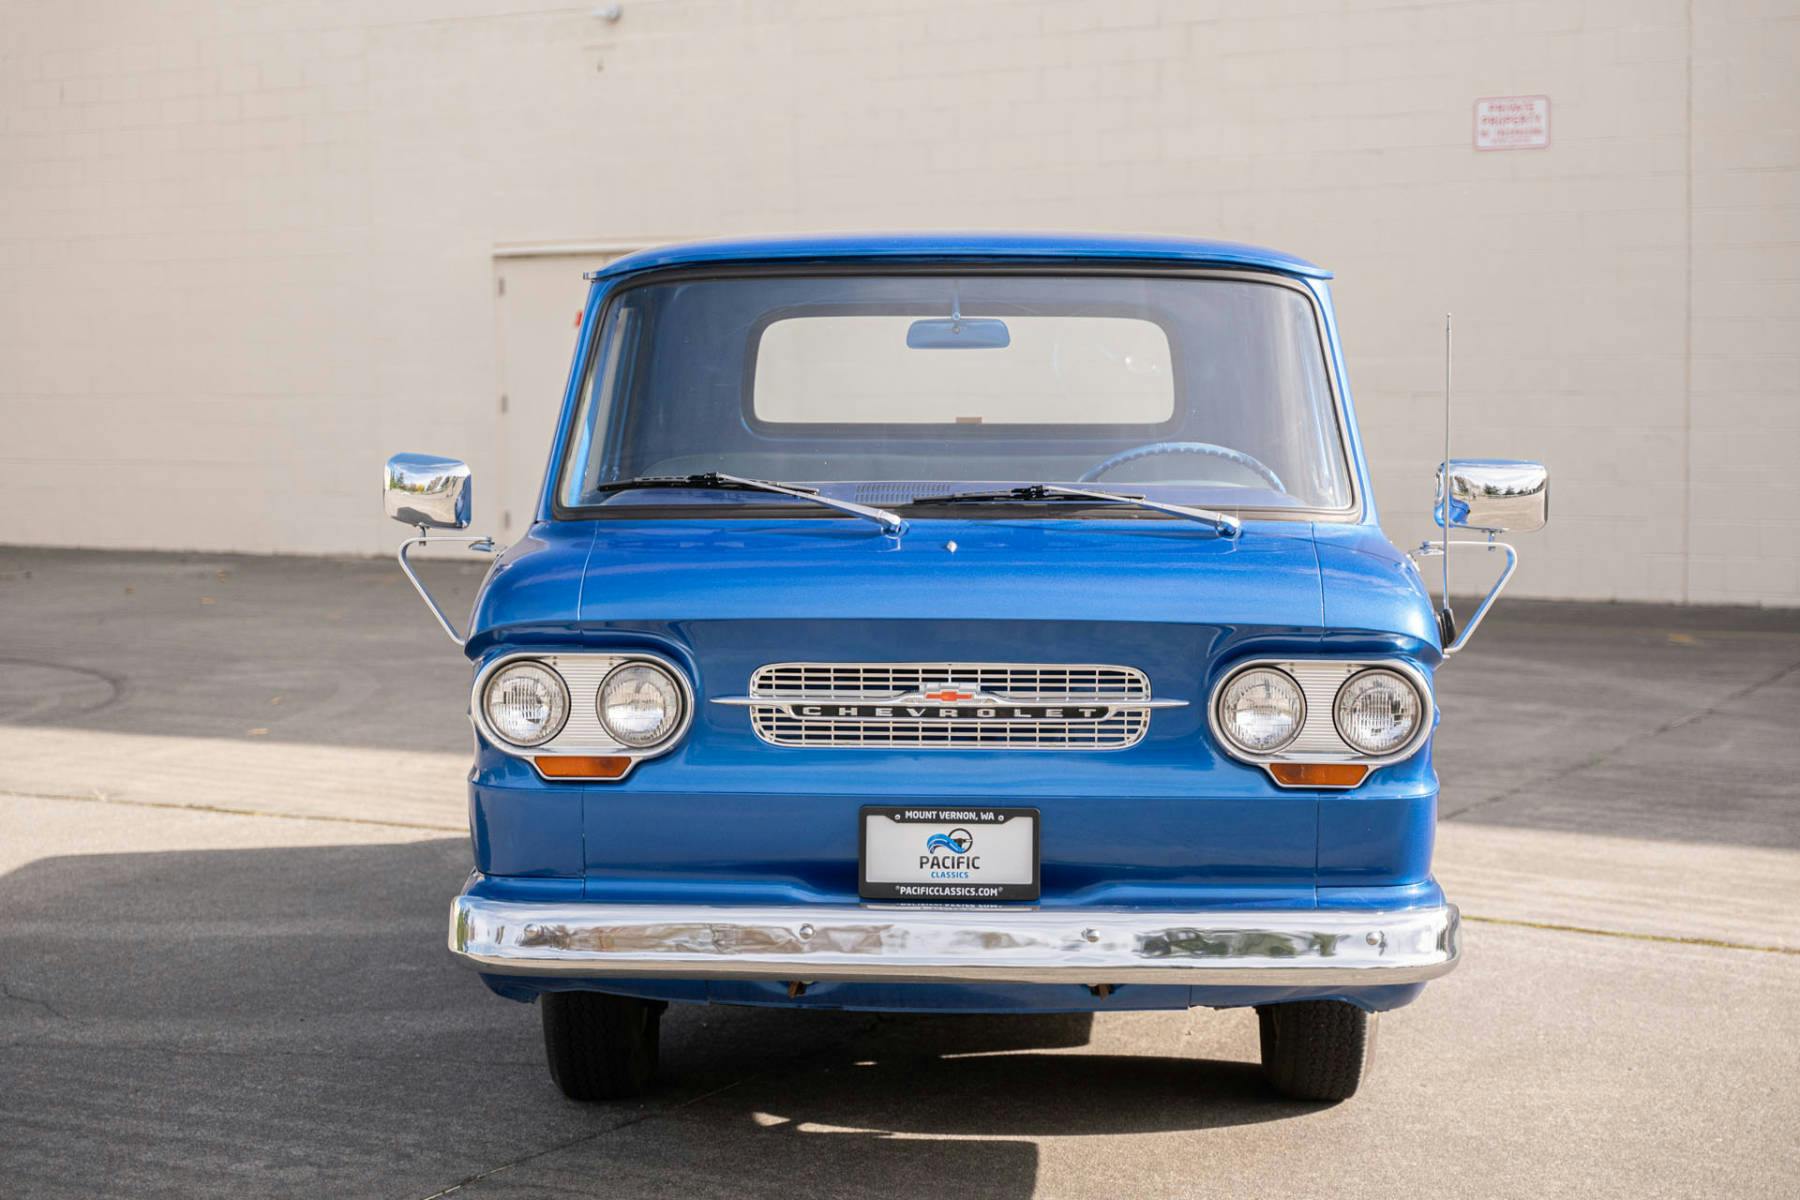 1961 Chevrolet Corvair 95 Rampside Pickup front